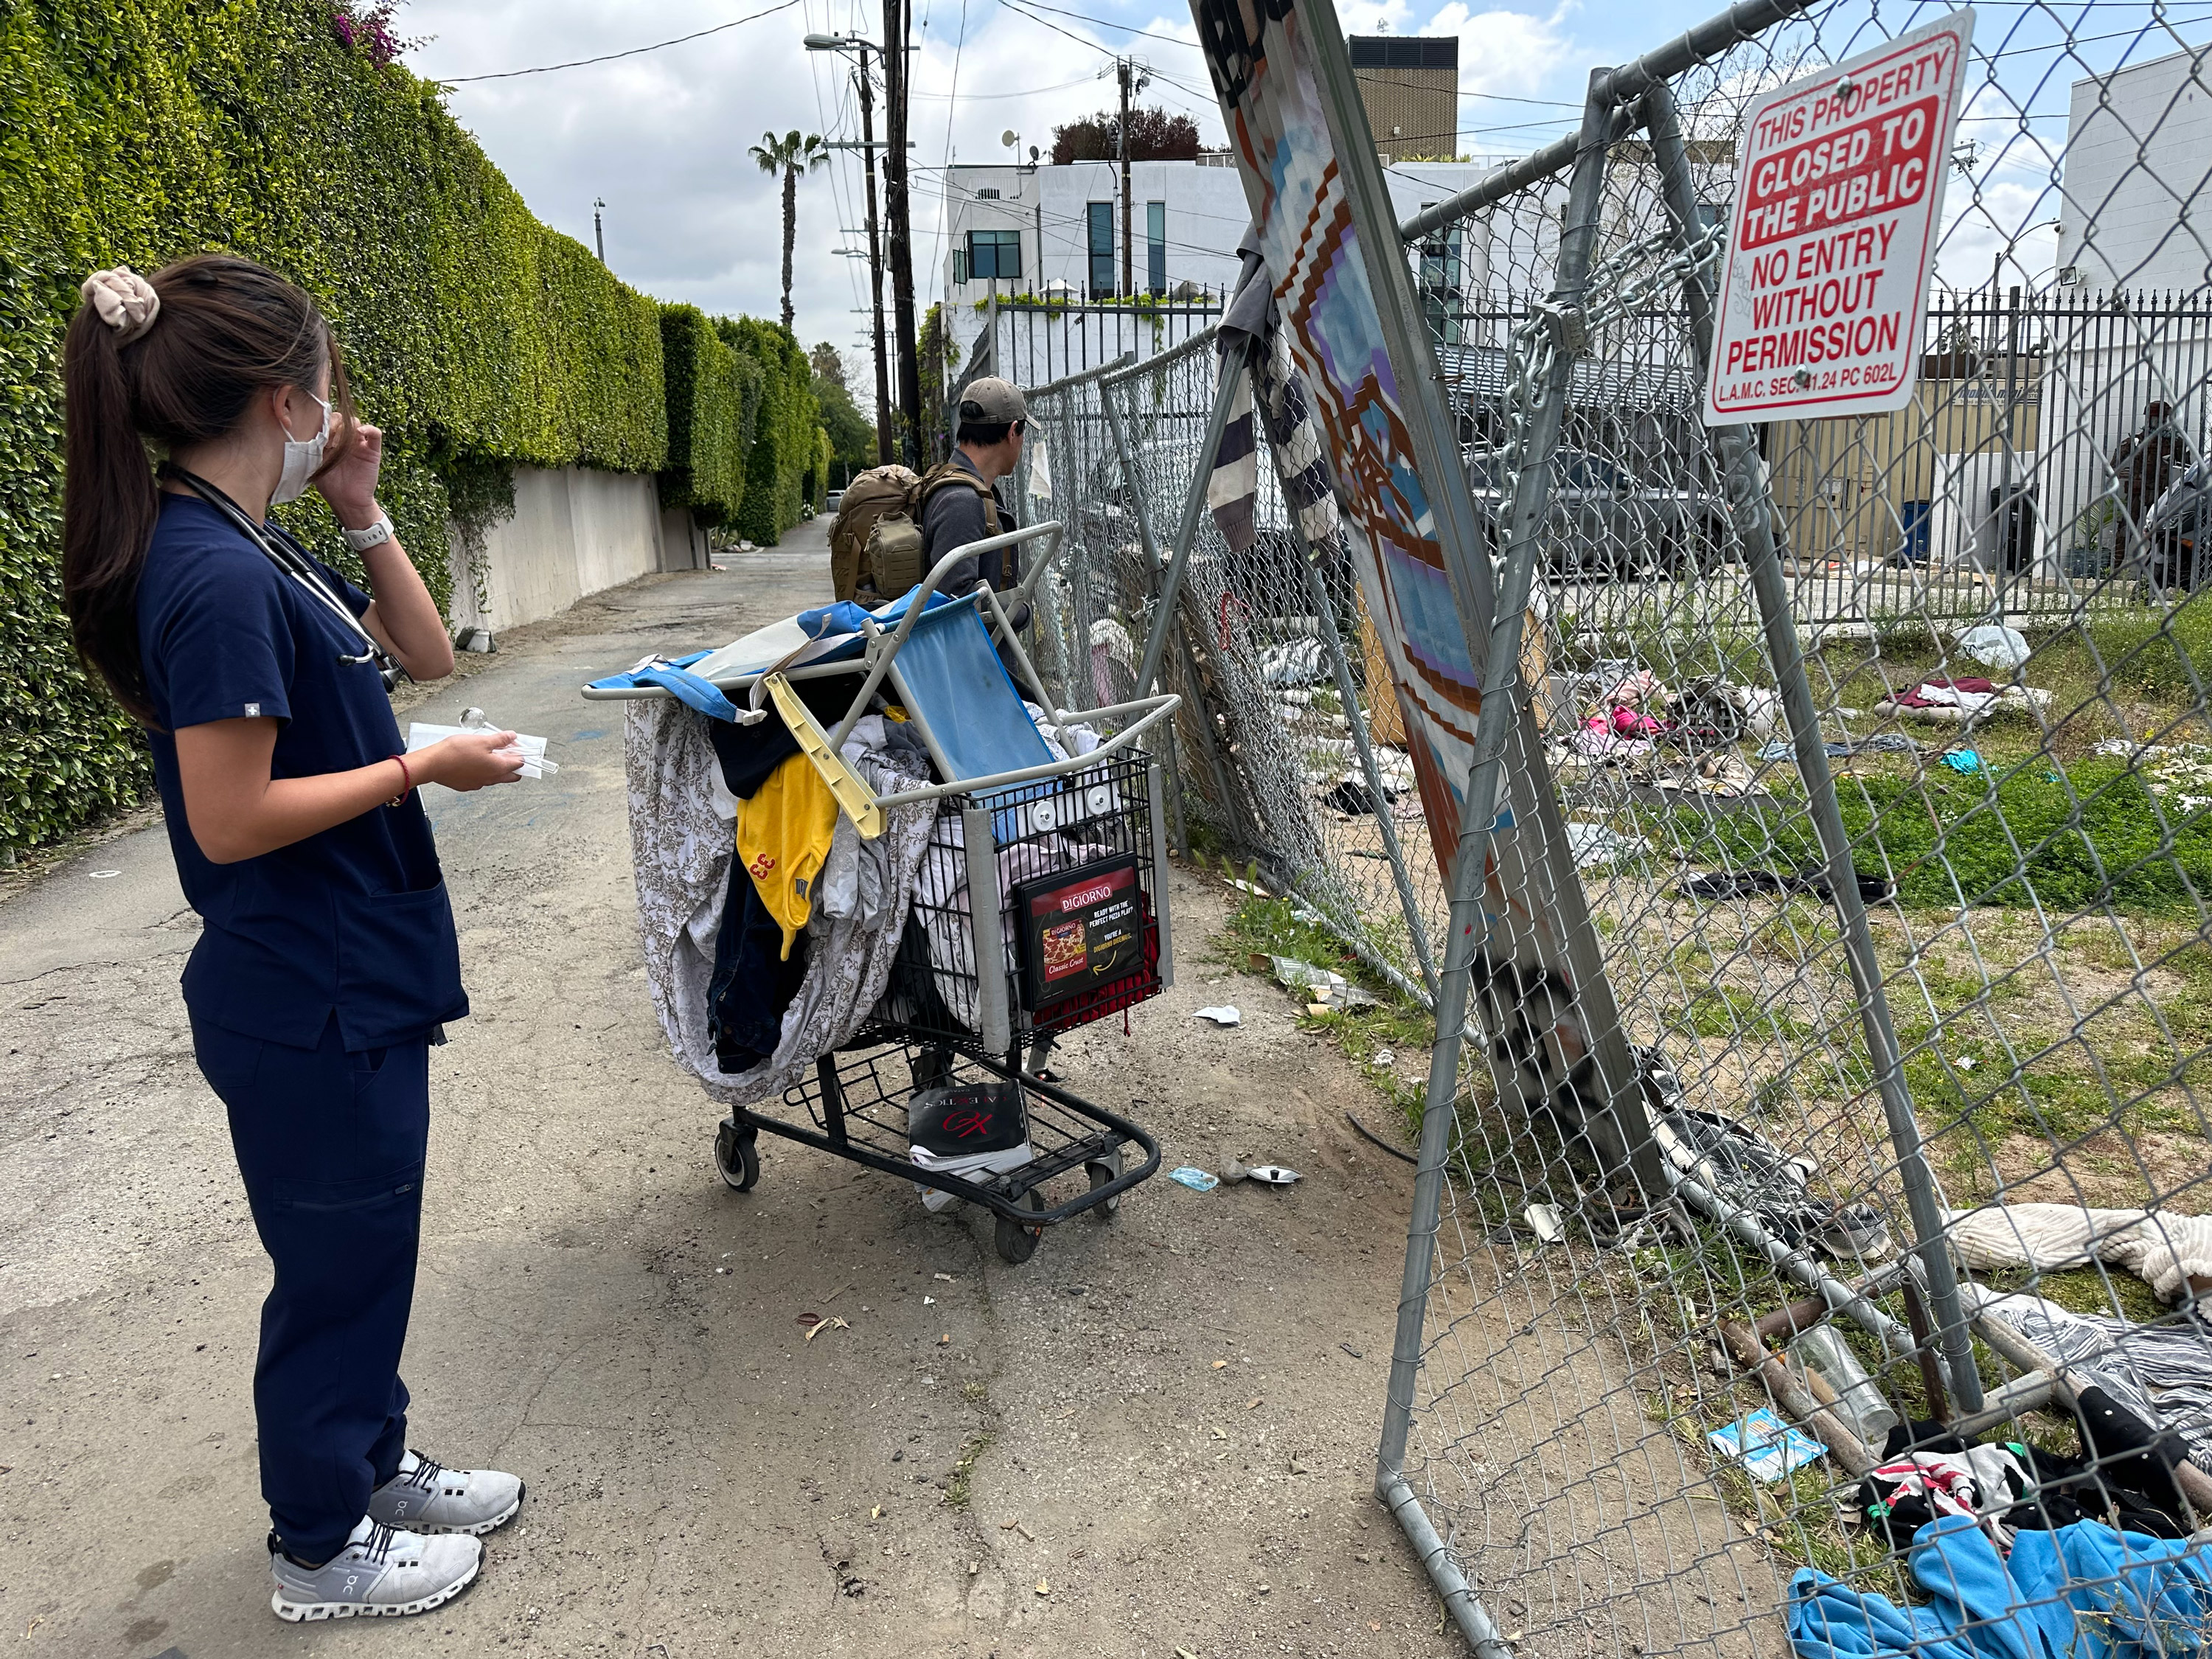 A photo of a medic in scrubs looking down an alleyway. She is next to shopping cart filled with belongings.